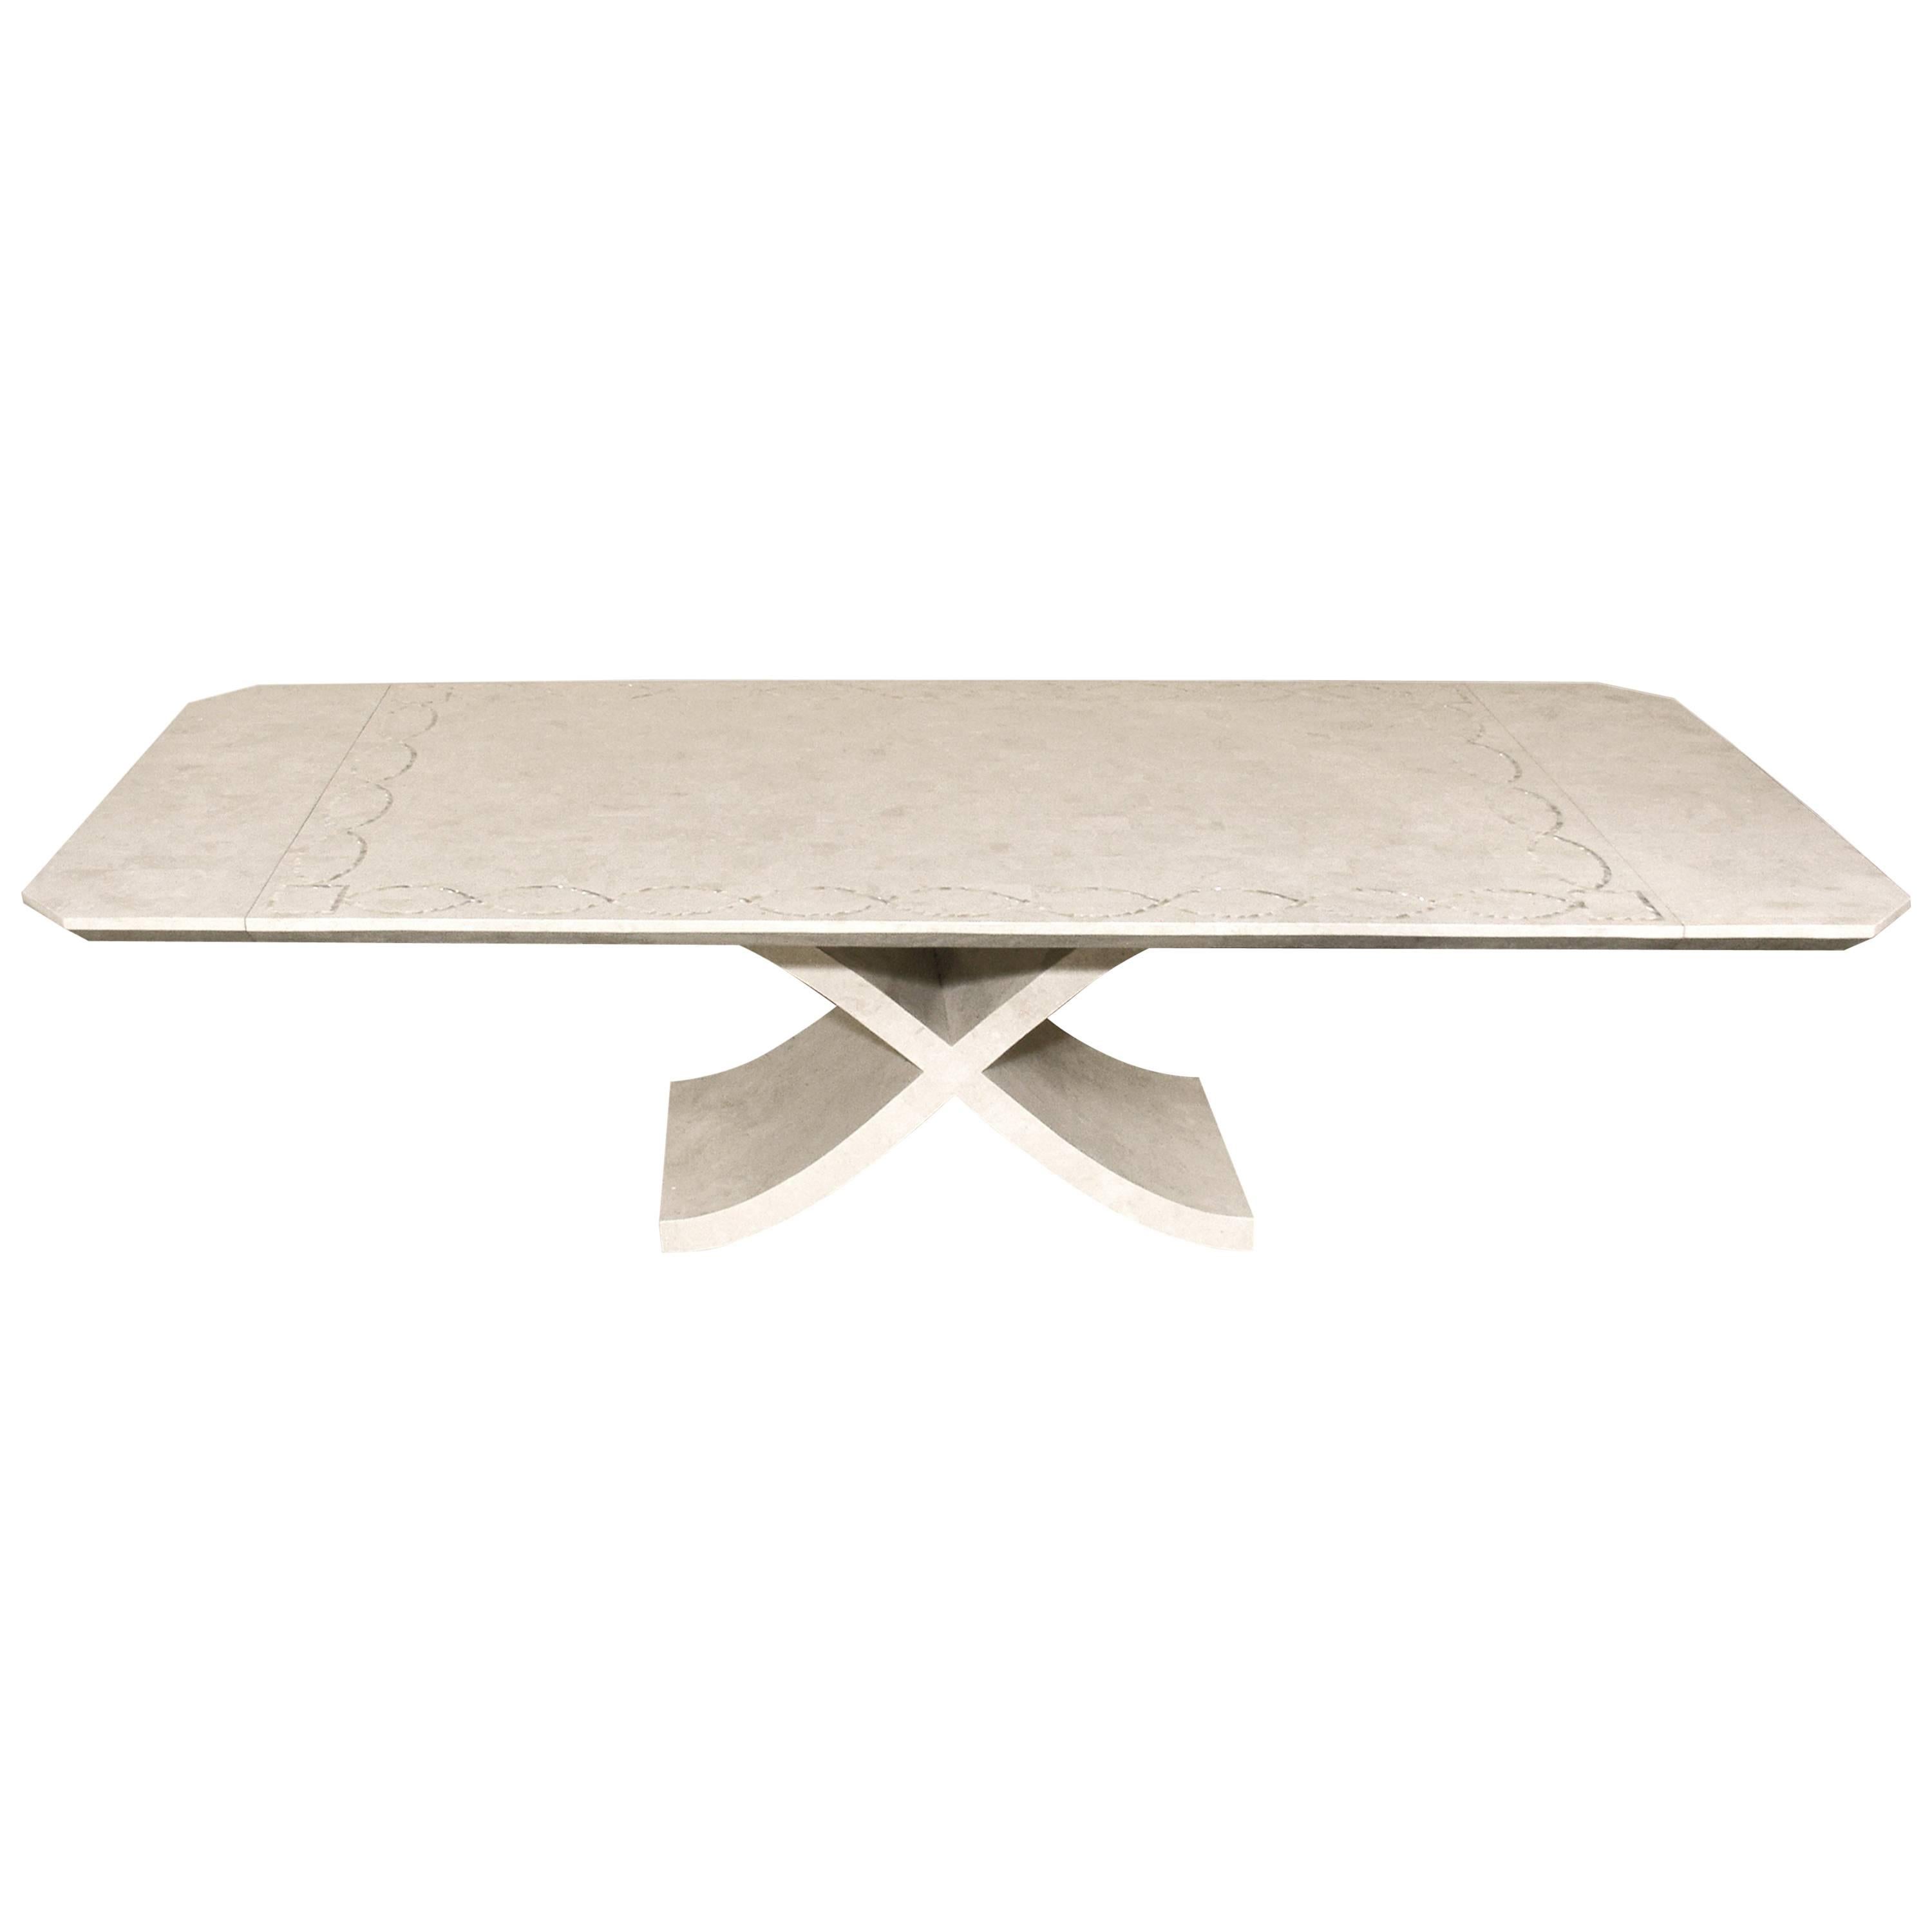 Large X Dining Table in White Tessellated Stone with Trocca Shell Inlay, 1990s For Sale